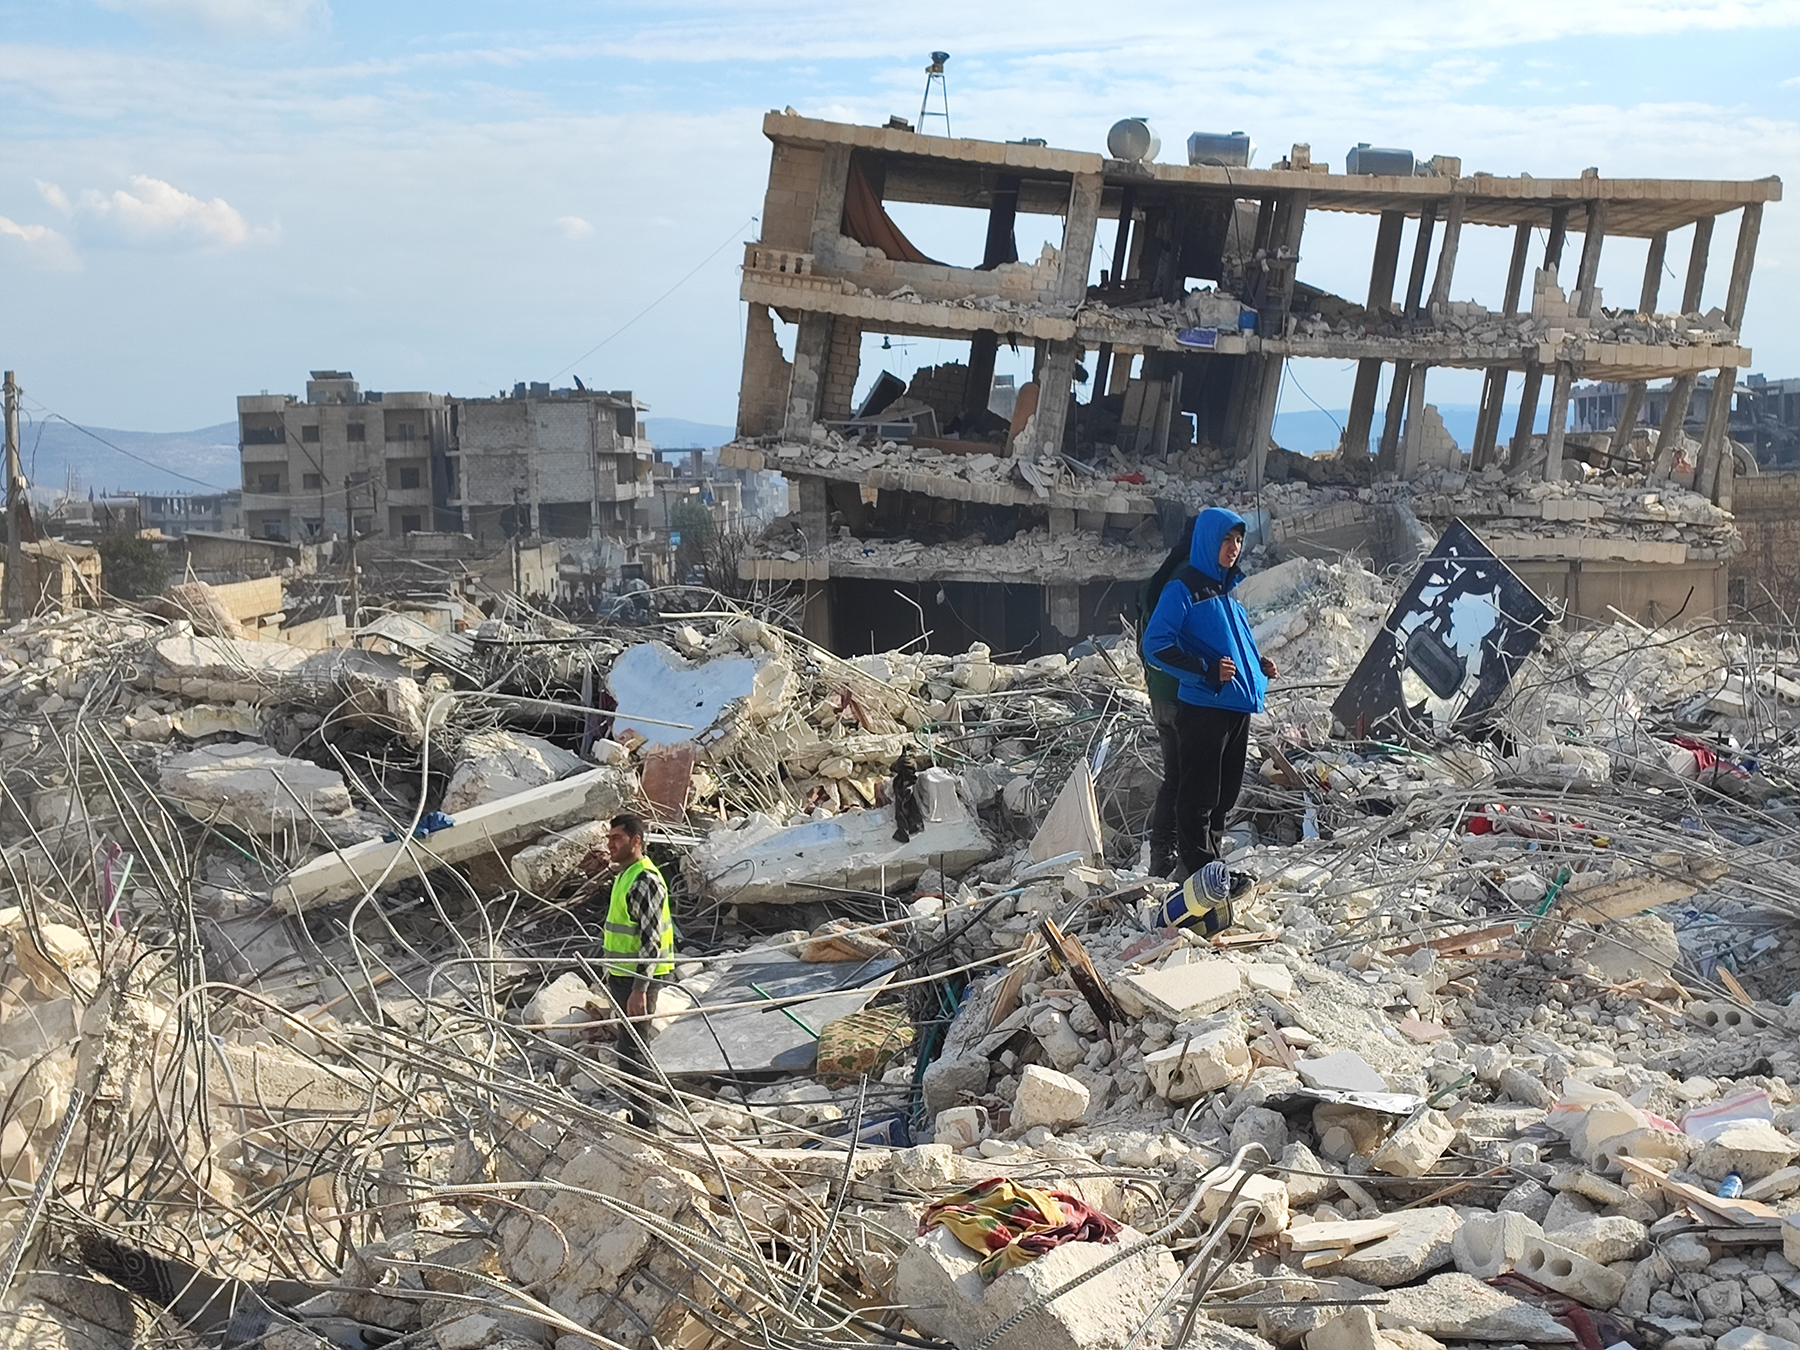 While EERI and Geotechnical Extreme Events Reconnaissance teams were not able to enter Syria to assess the damage, photos show devastation similar to that seen in neighboring Turkey. (Image courtesy of Mohammad Bash/Shutterstock)